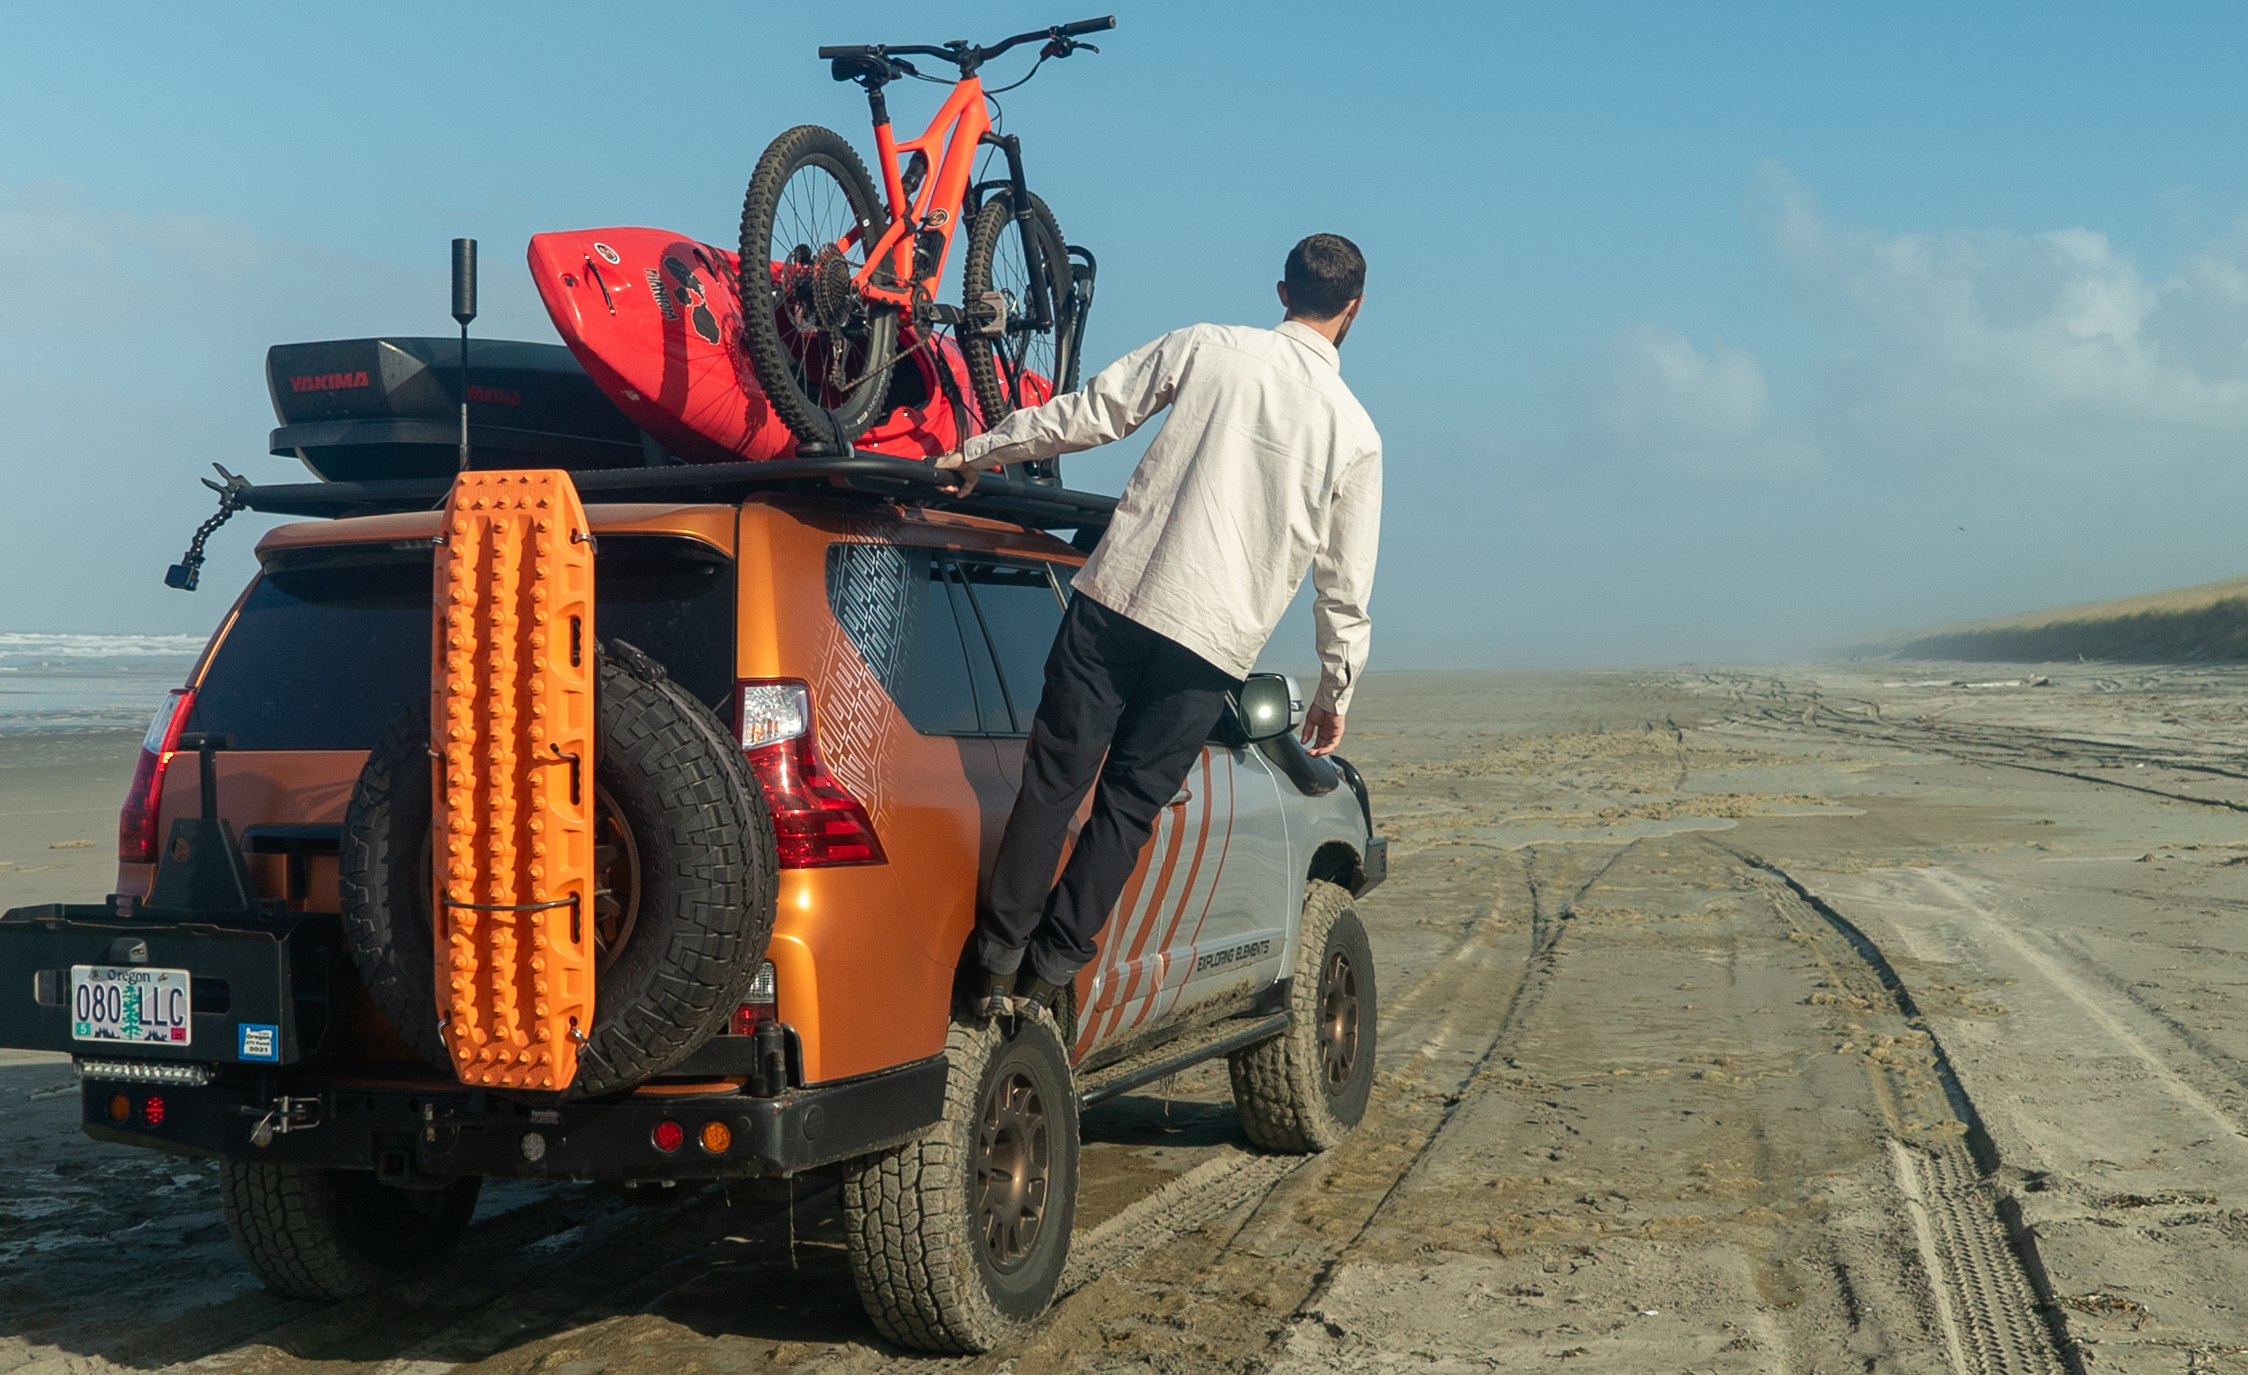 Overlanding Is Messy: How to Keep Your Toys Ready for Action